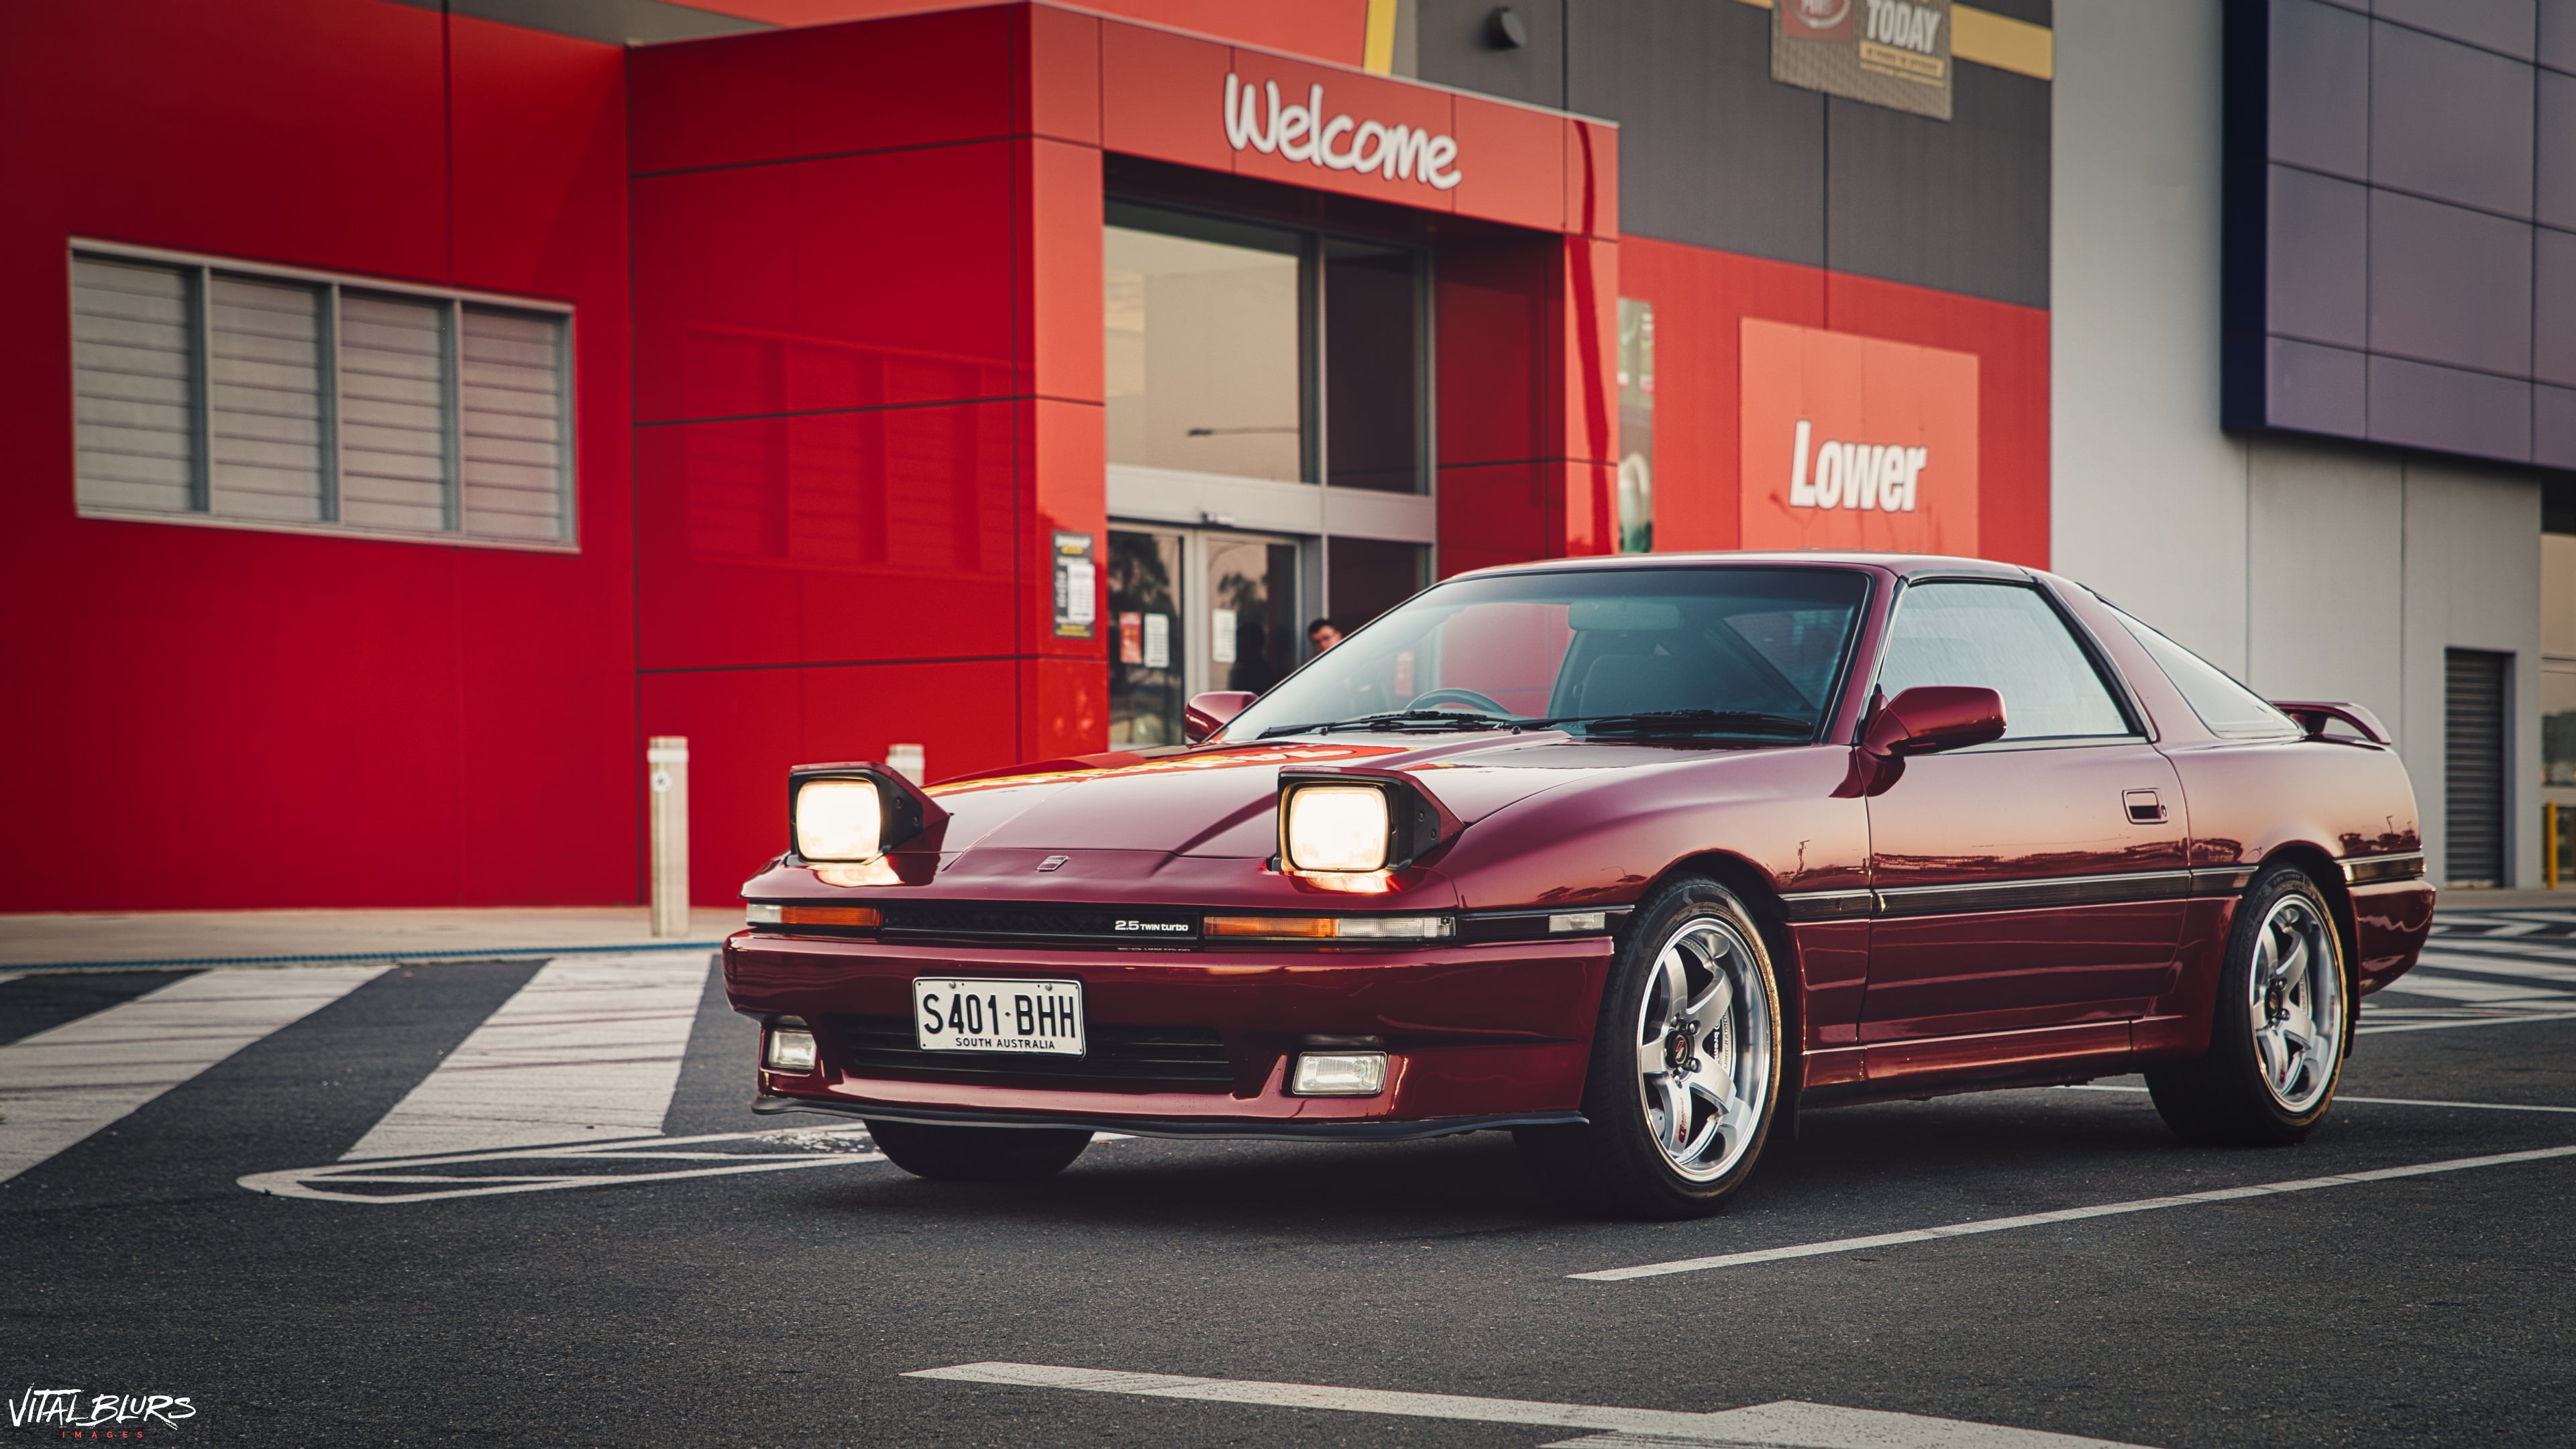 Toyota Supra MK3, Japanese cars, JDM, red cars, vehicle, outdoors